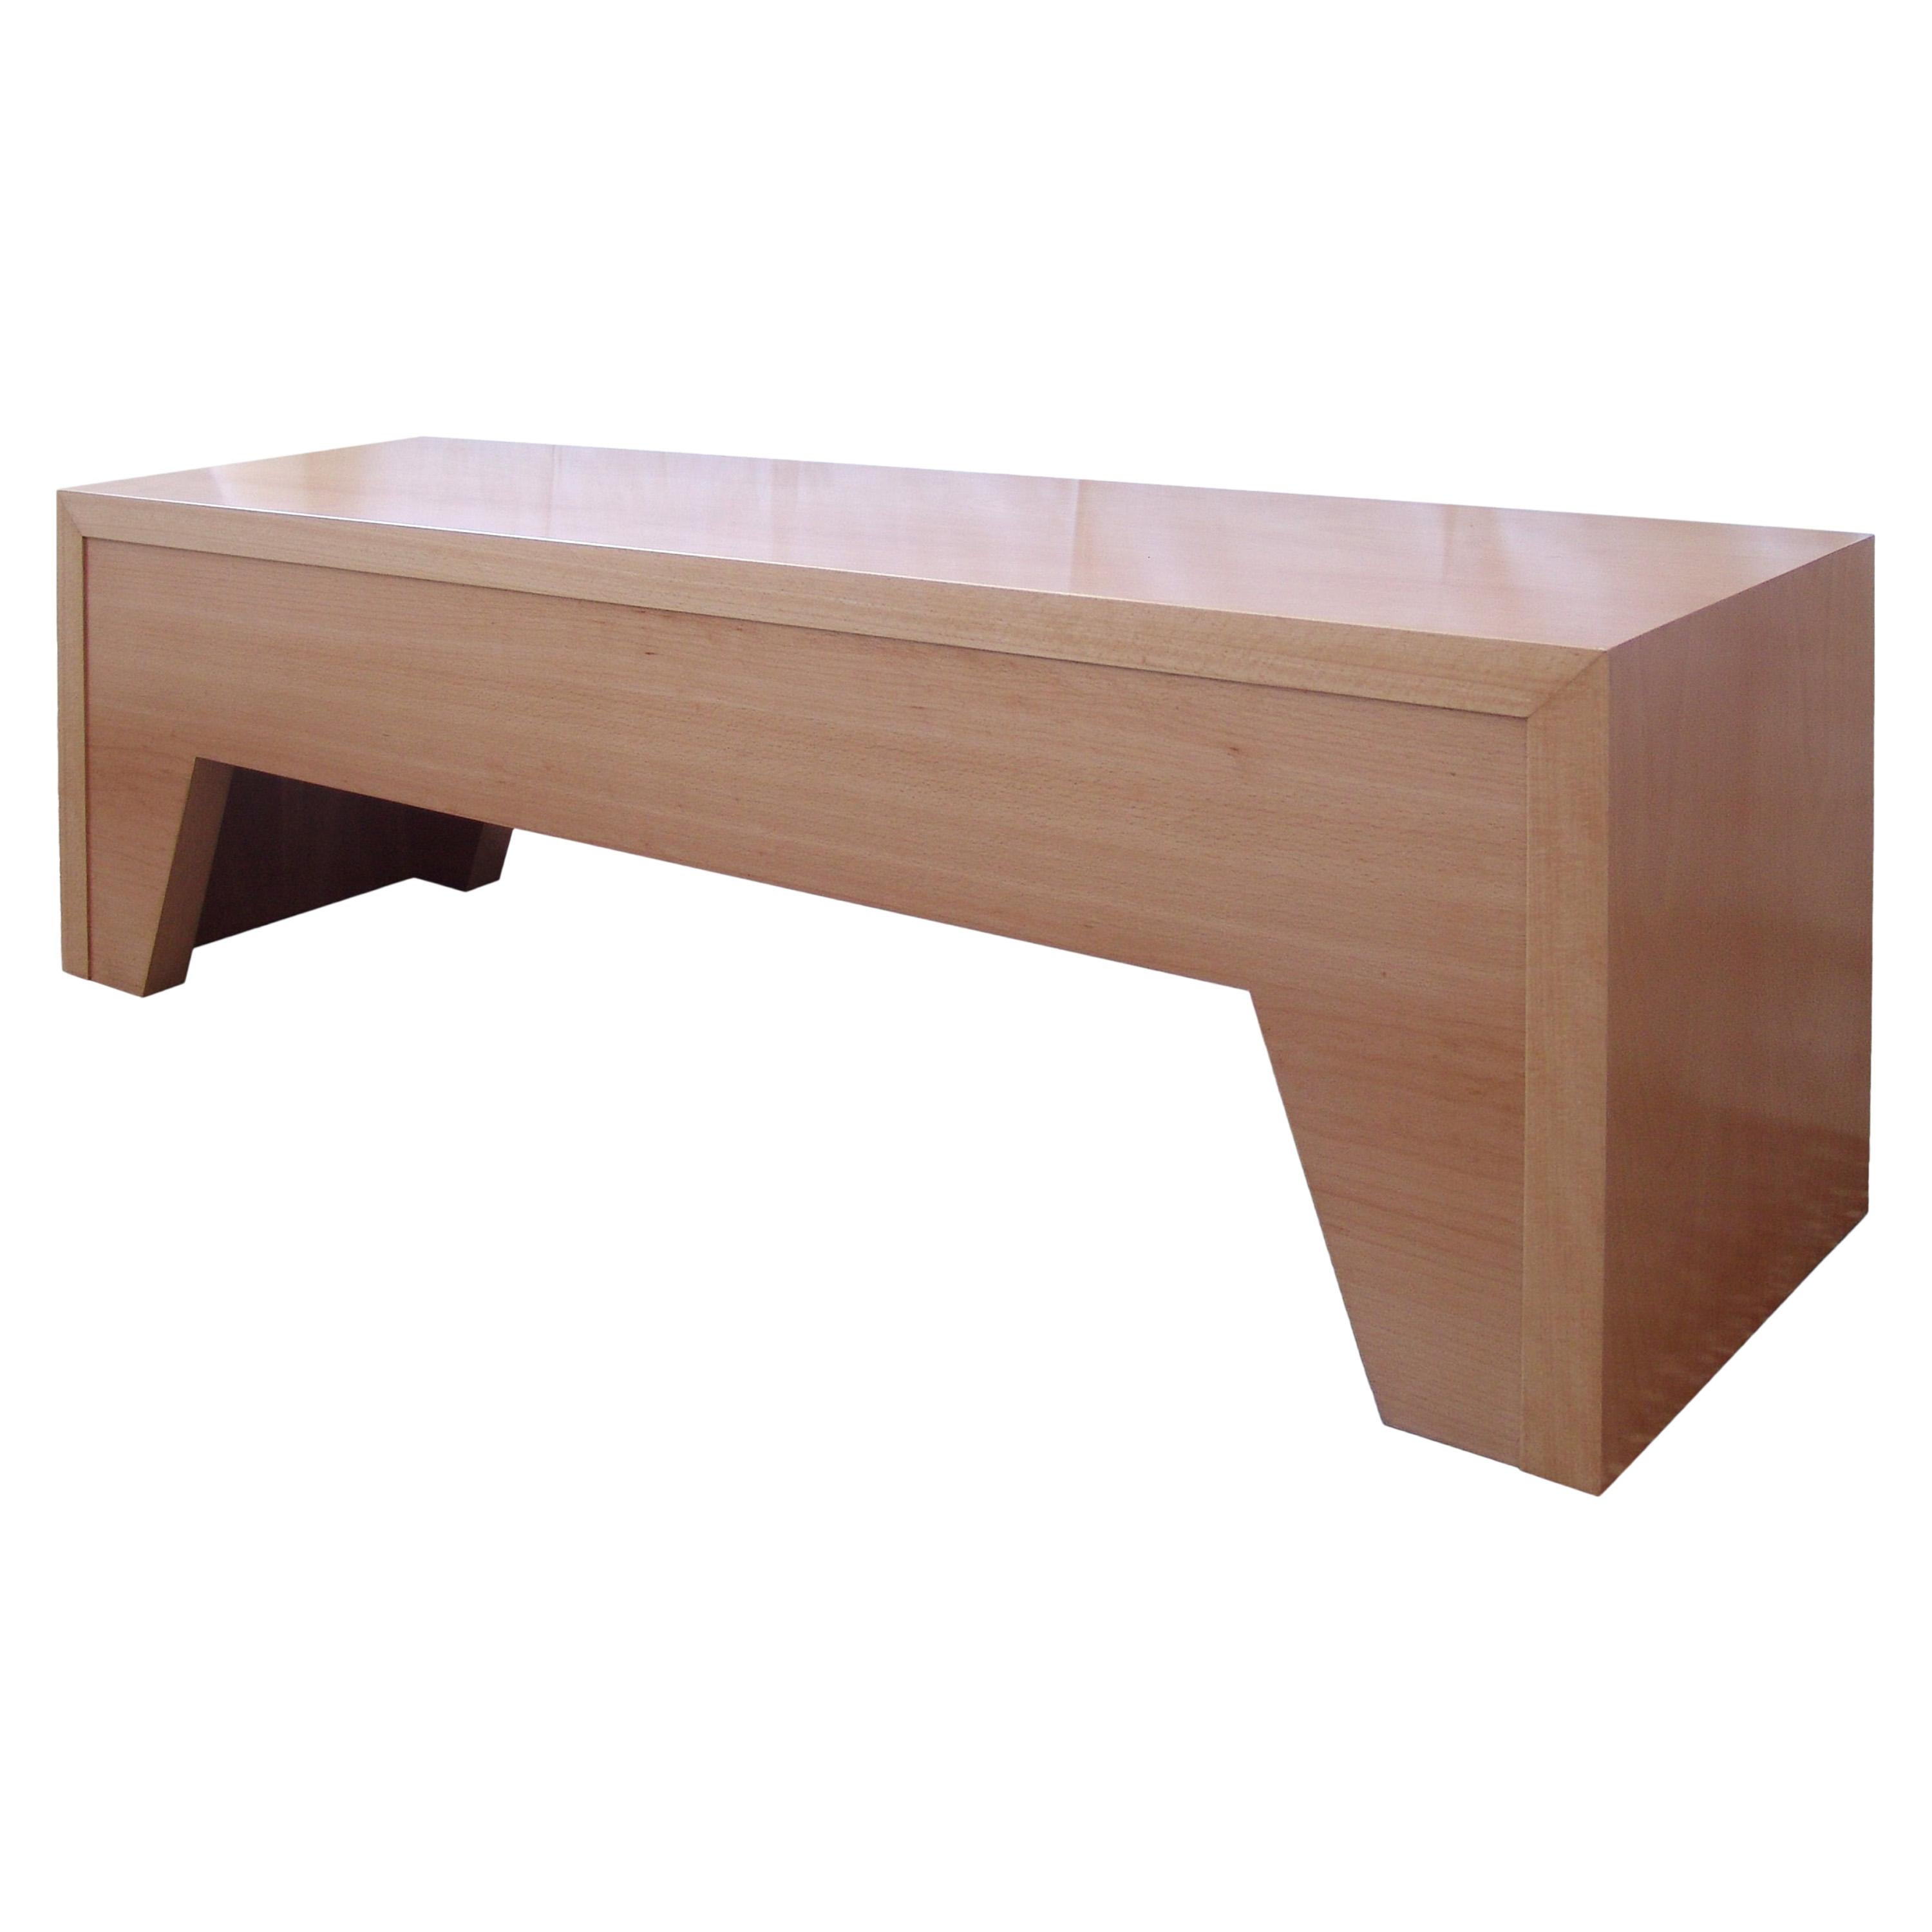 21st Century, Minimalist, European, Bench Made of Lined Beechwood in Light Brown For Sale